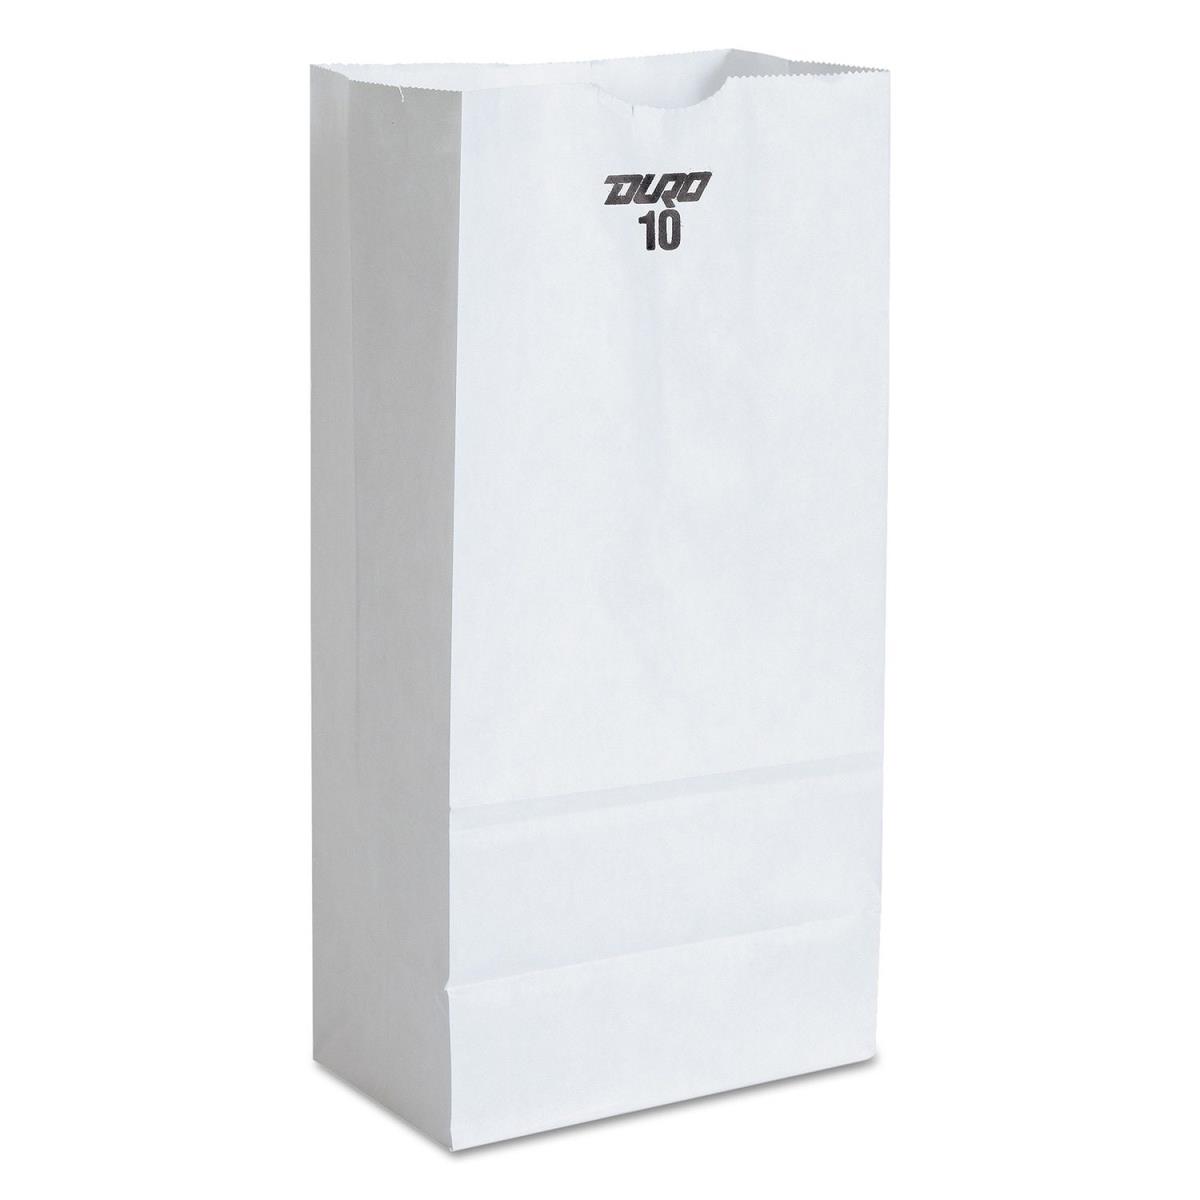 Duro Hilex Poly 51046 White Grocery Bag - Case Of 500